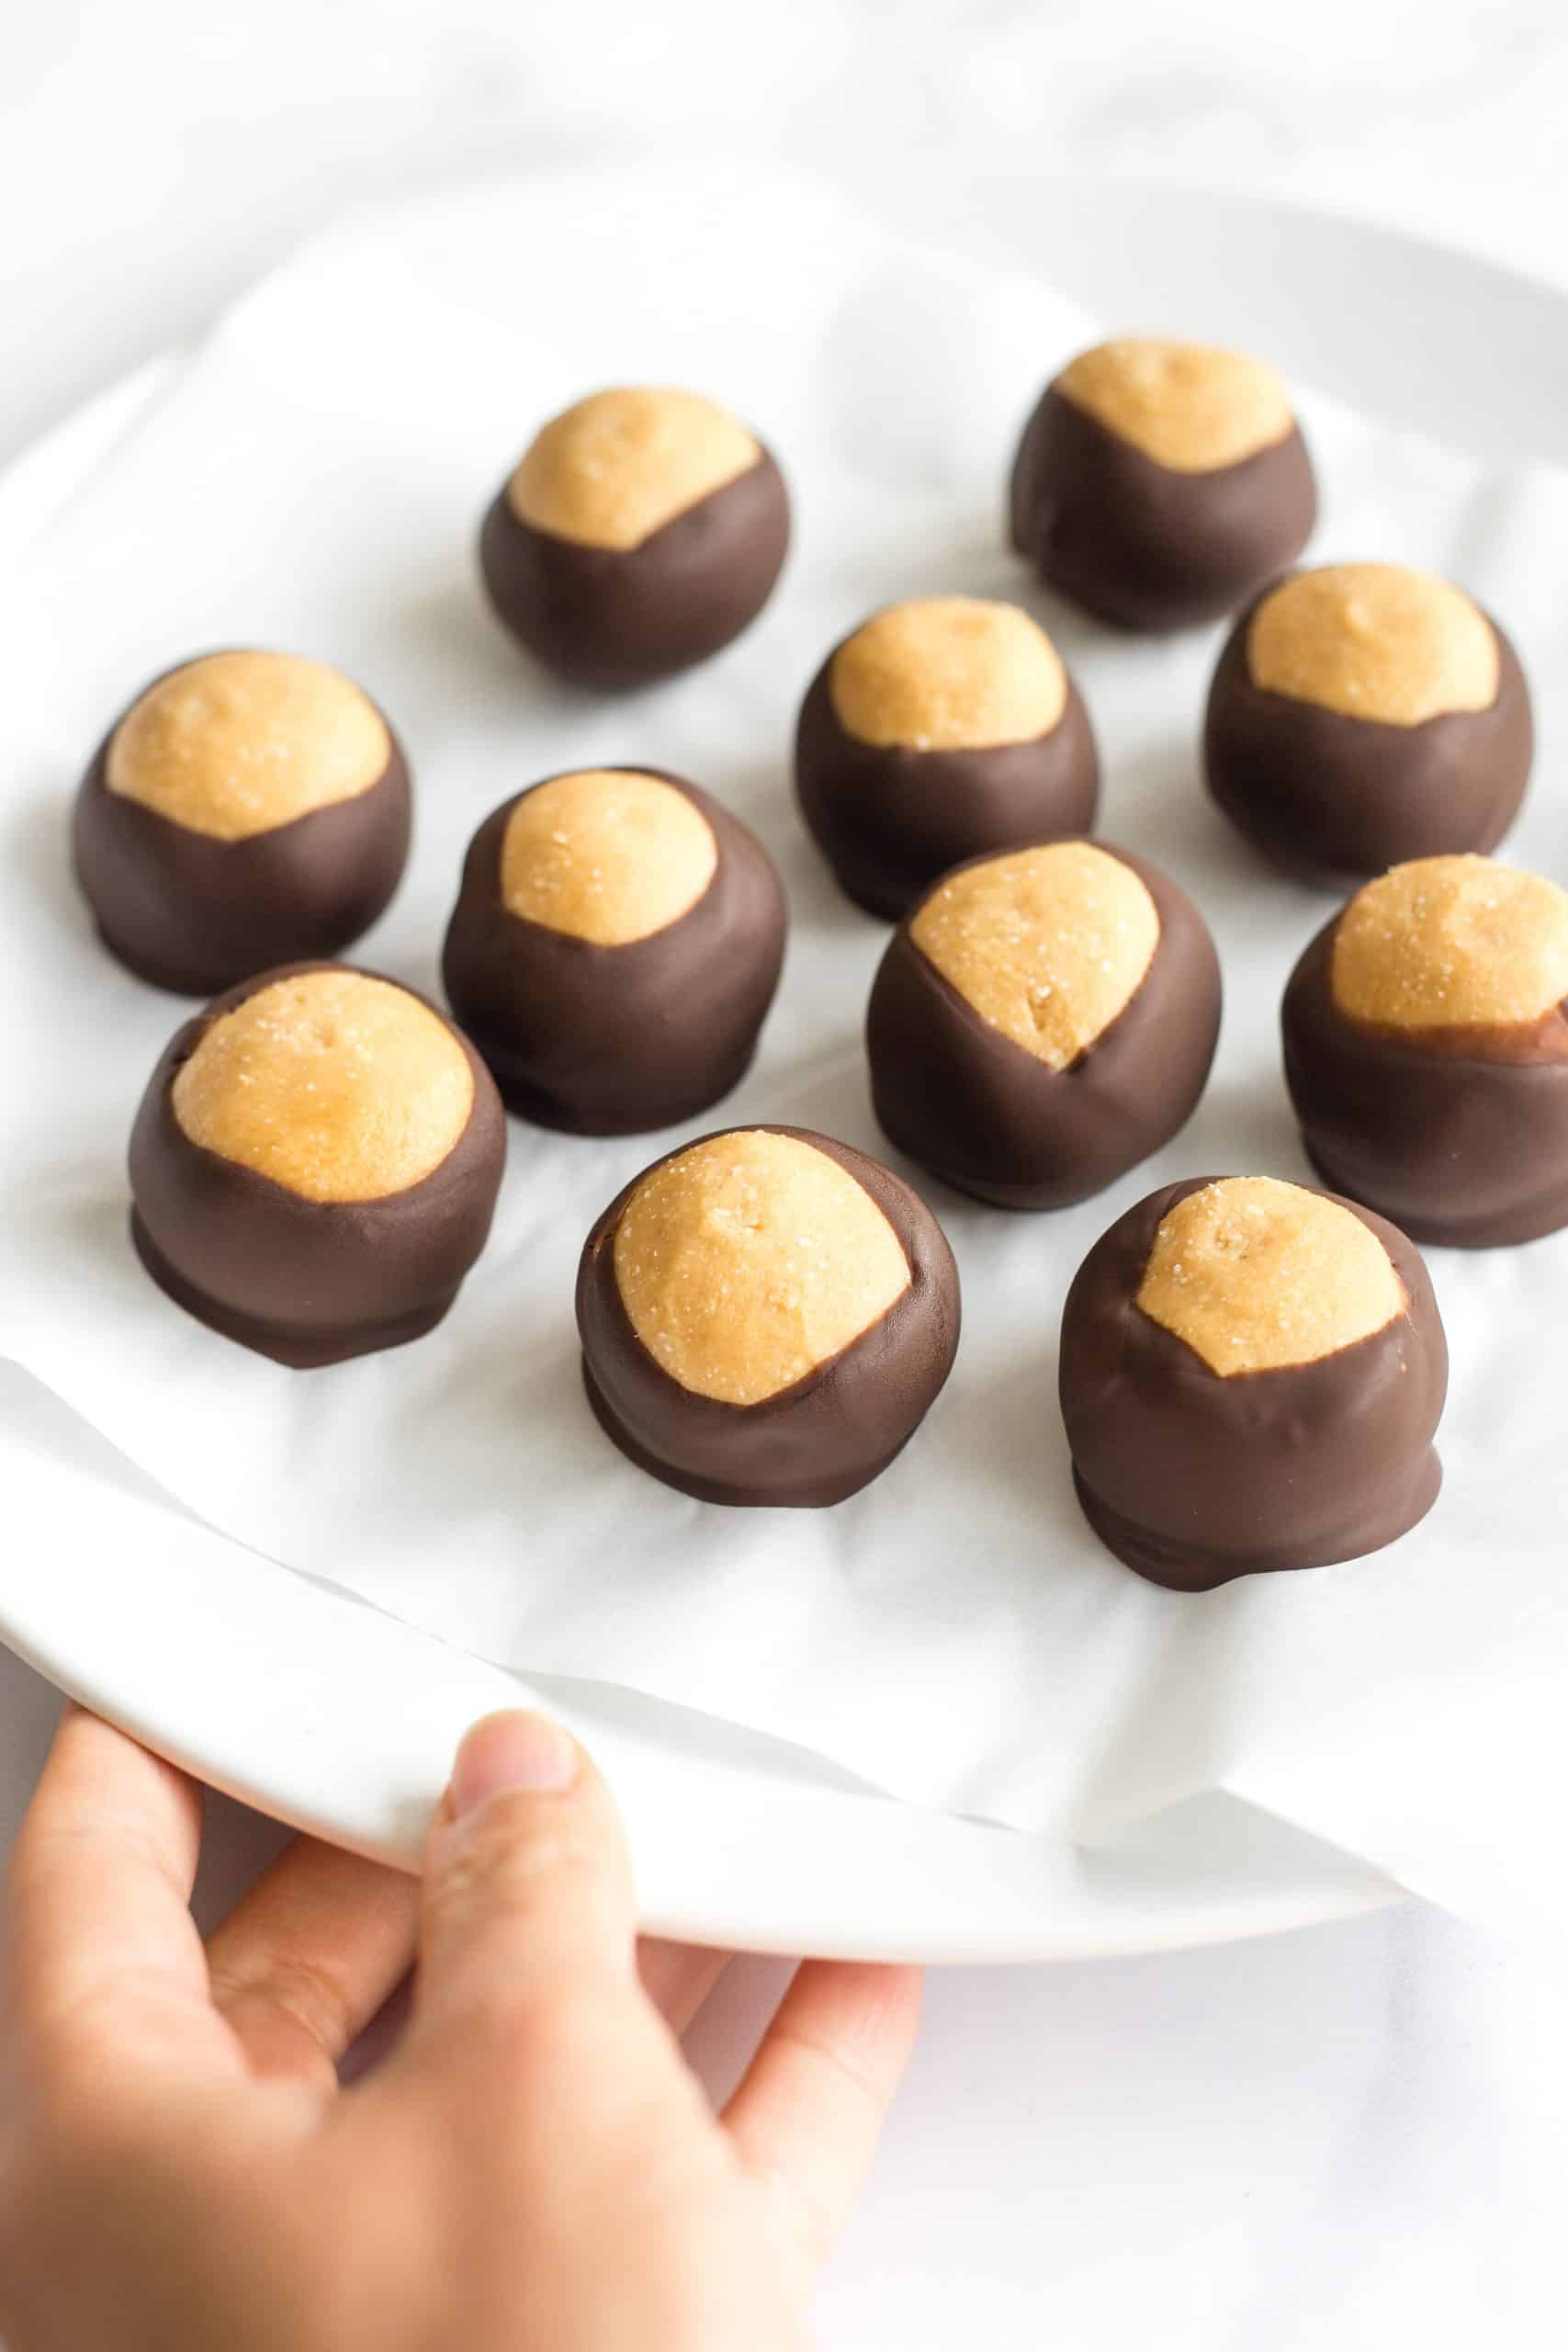 Holding a plate of chocolate-coated peanut butter balls.